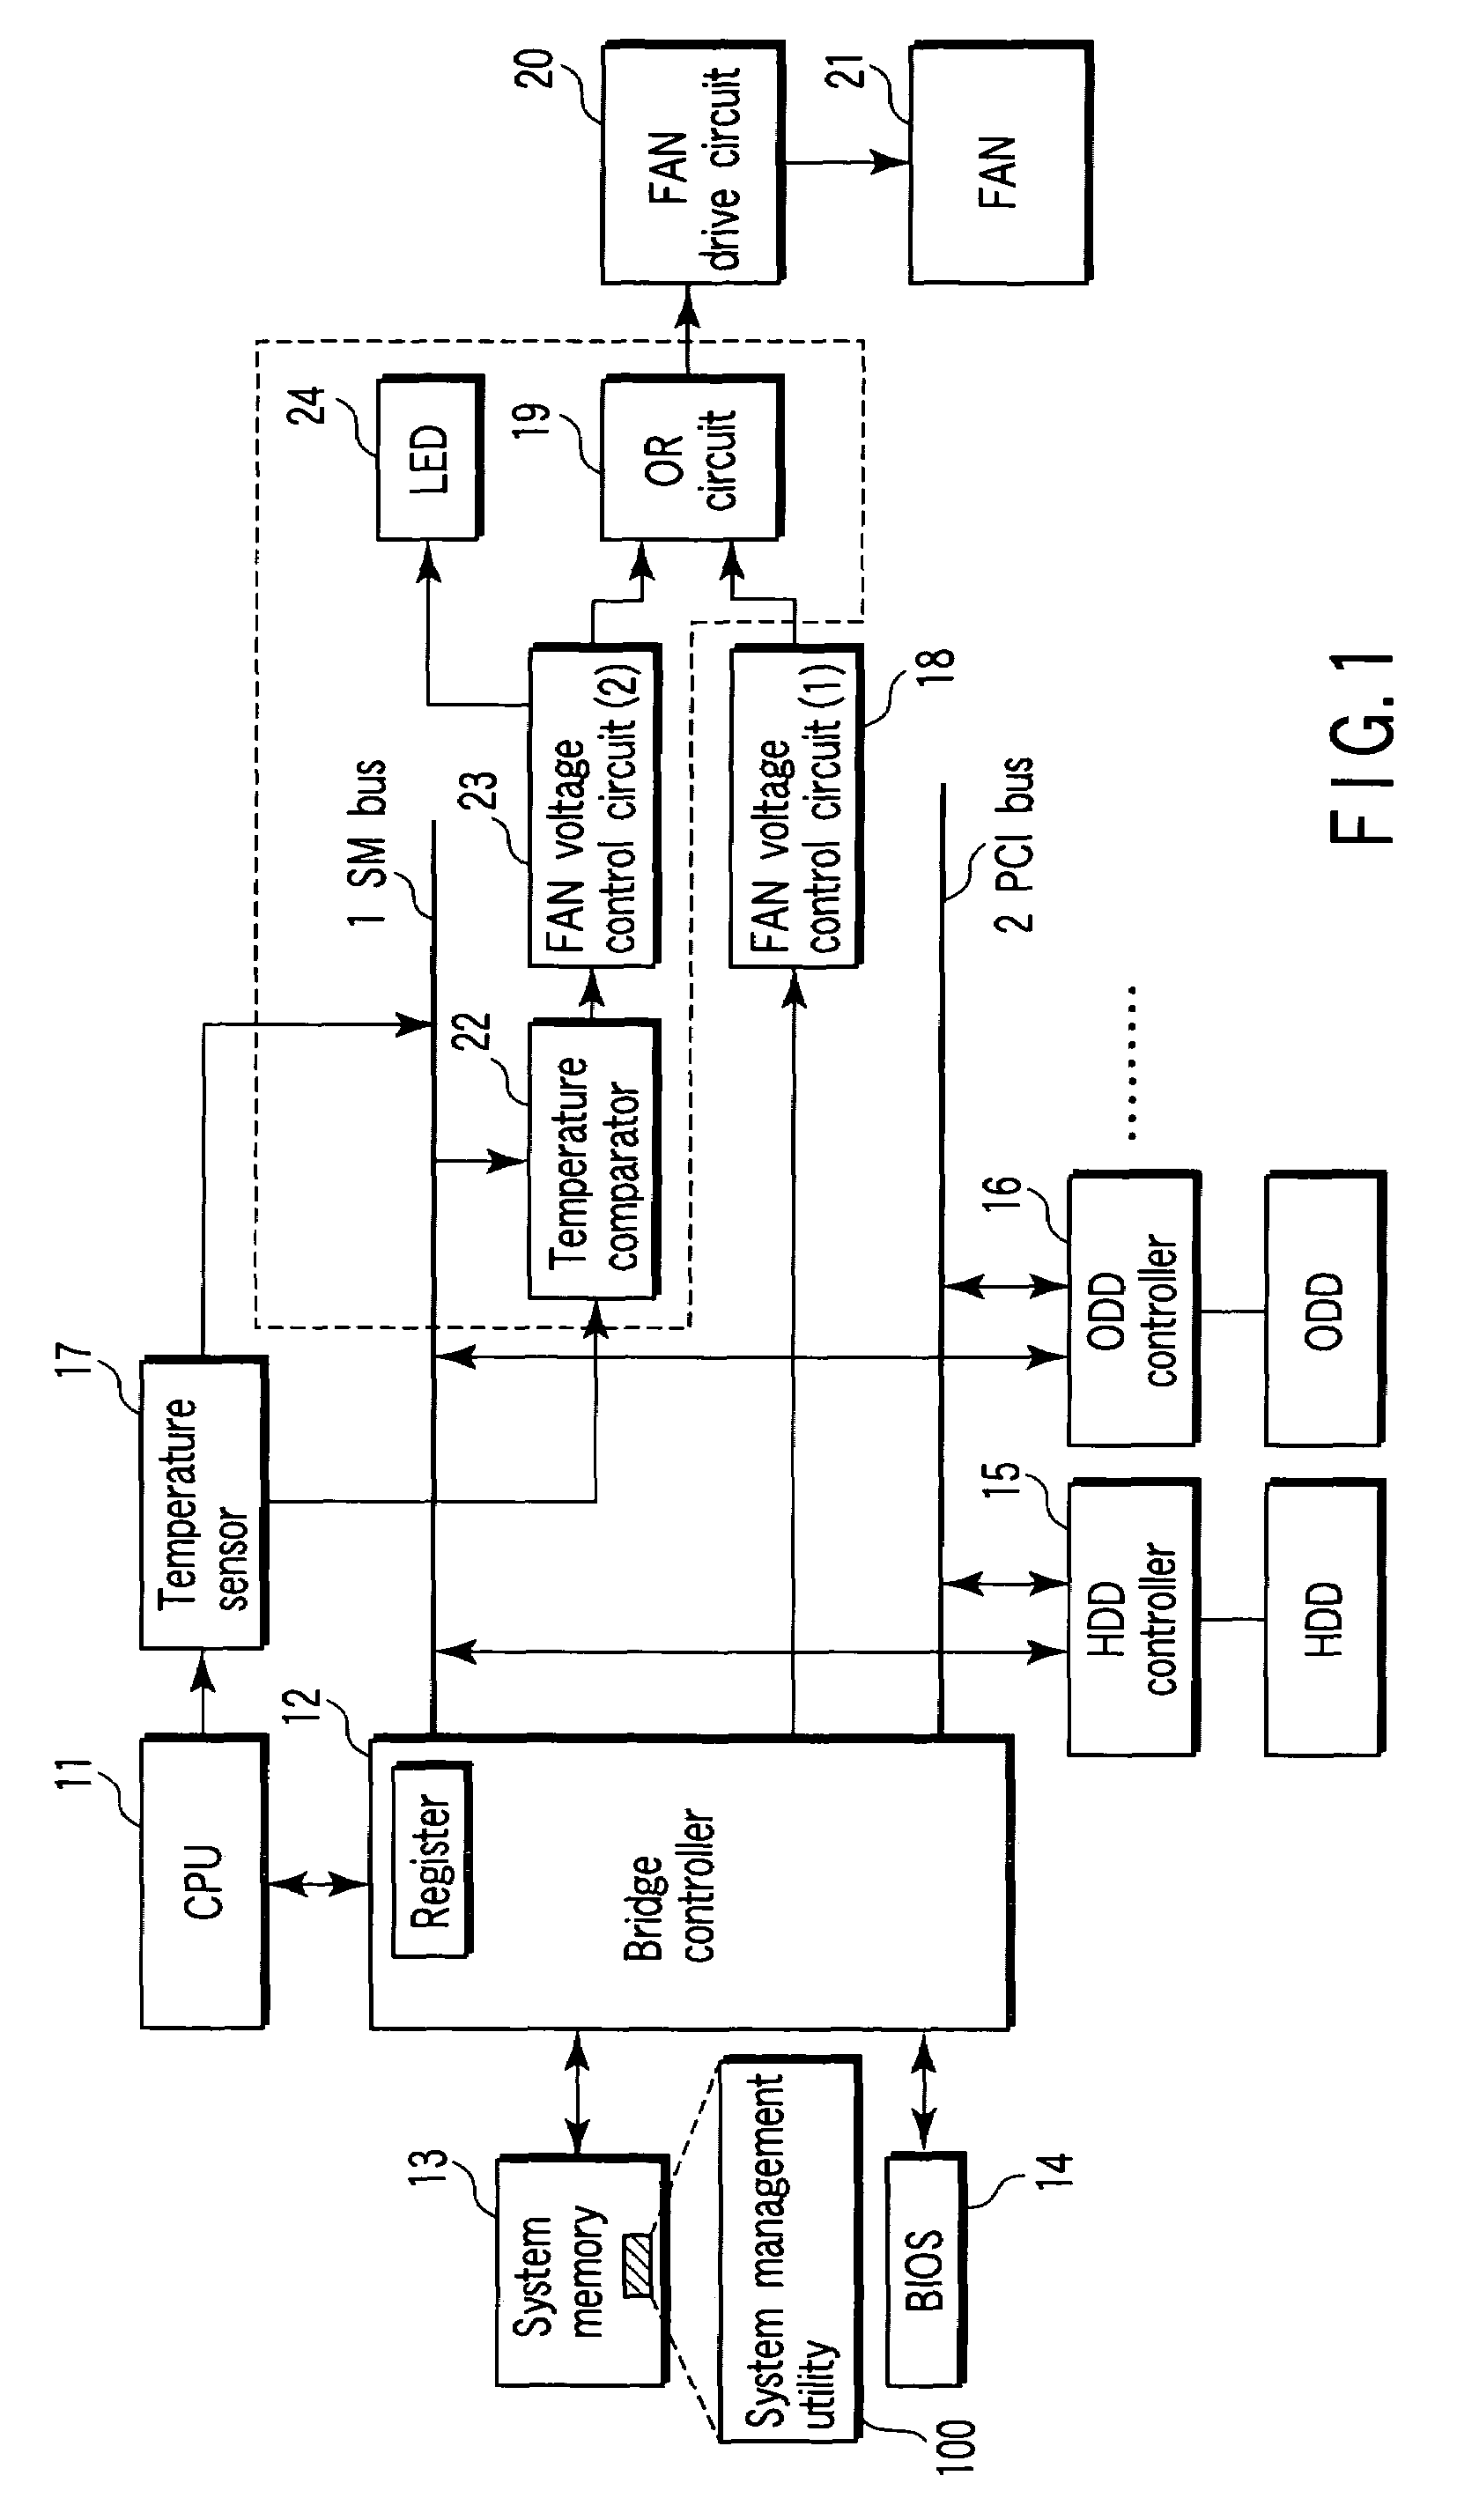 Electronic apparatus that allows cooling fan to be driven with certainty even at the time of software malfunction/lock-up or at the time of controller failure